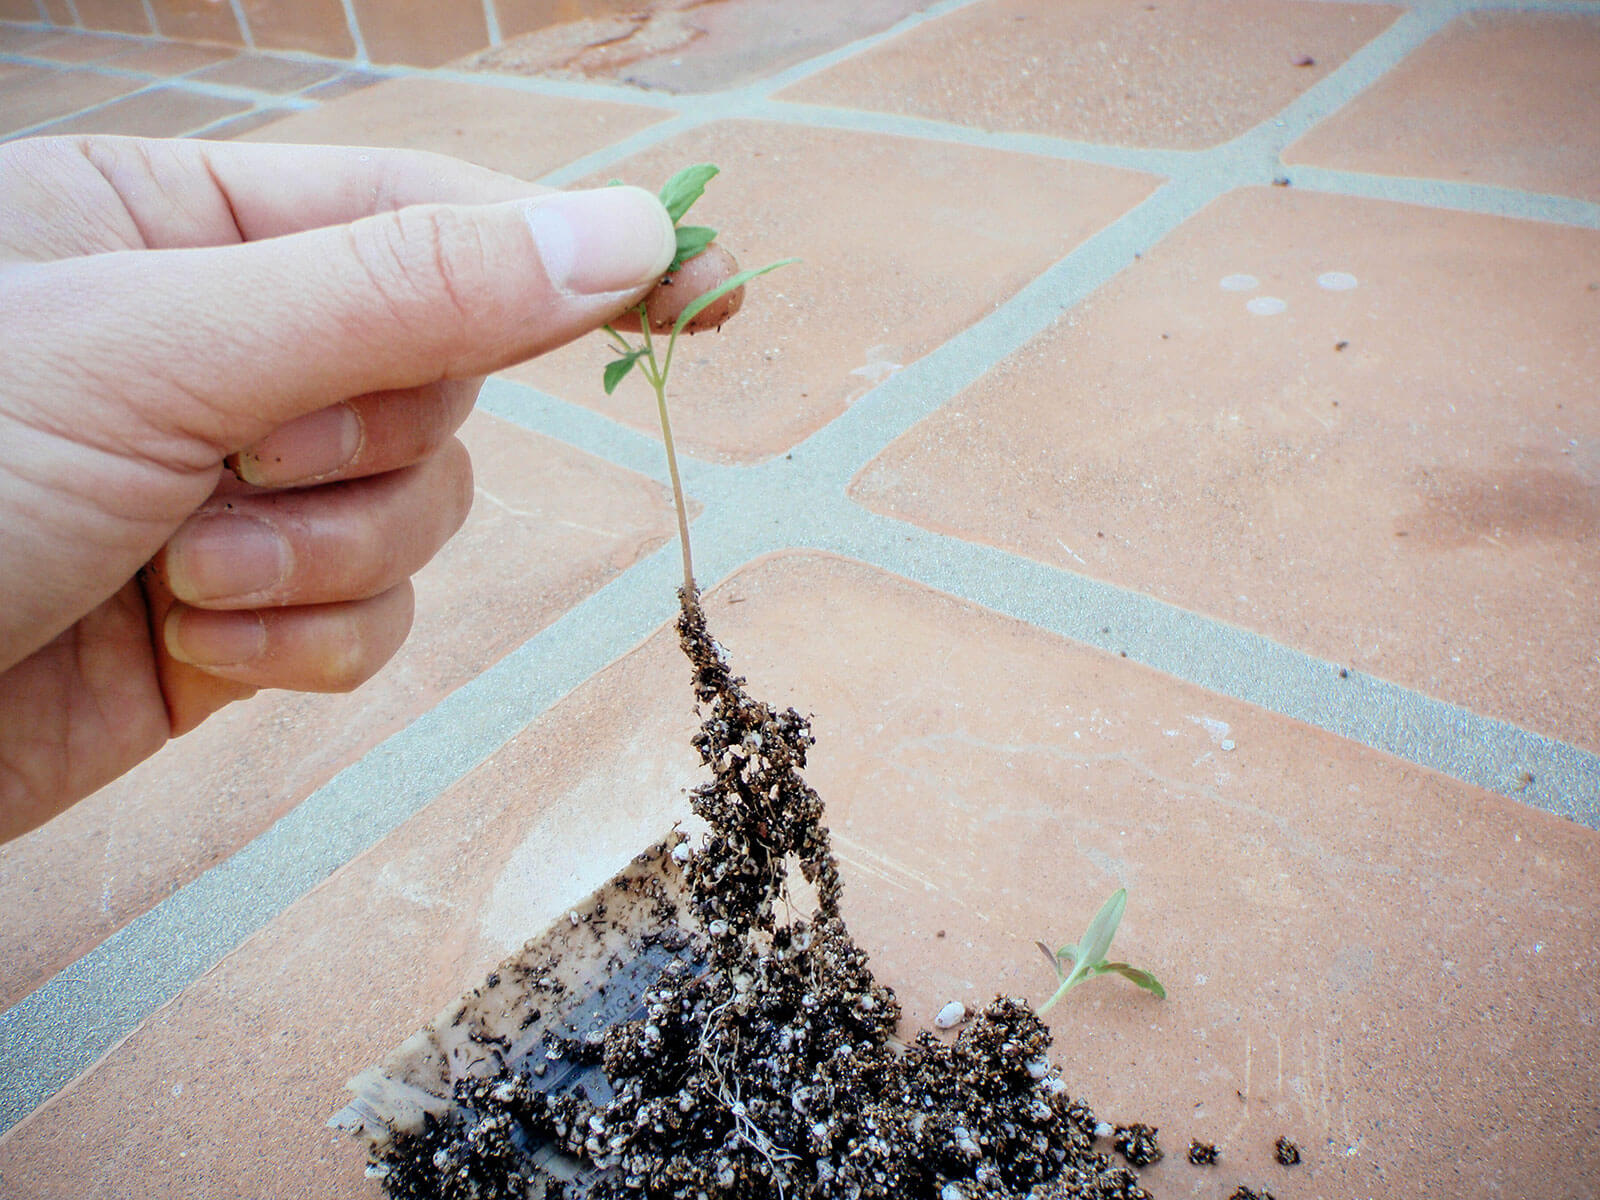 Separate the tomato seedlings